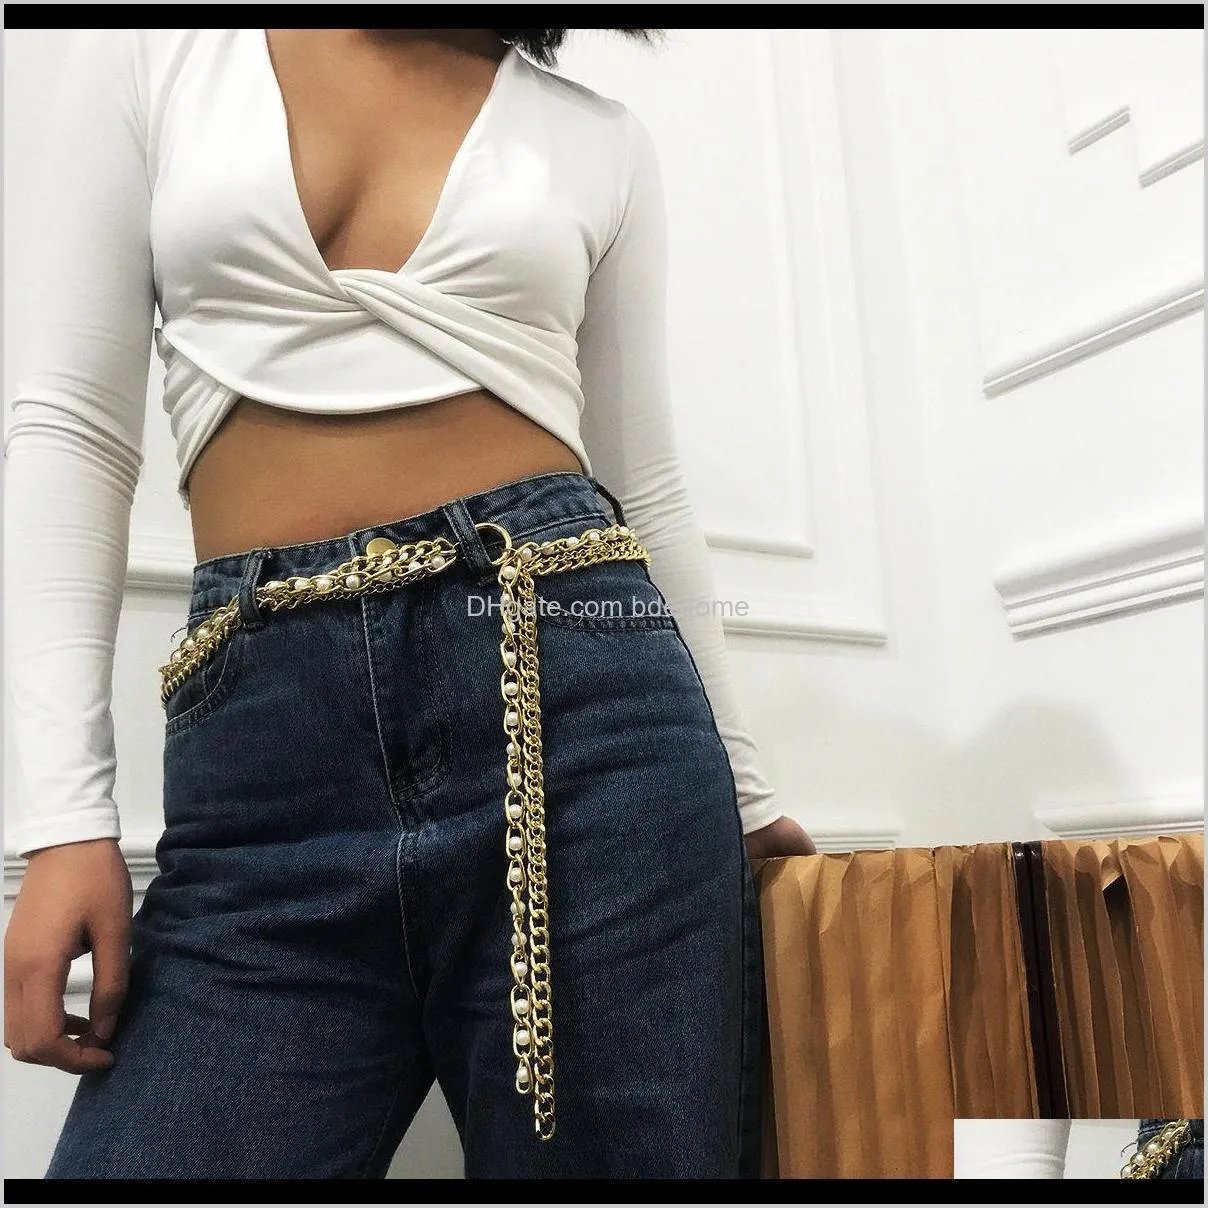 Vintage Multilayer Chunky Thick Cuba Pearl Body Chain for Women Punk Tassels Pendant Harness Waist Belly Chain Jewelry